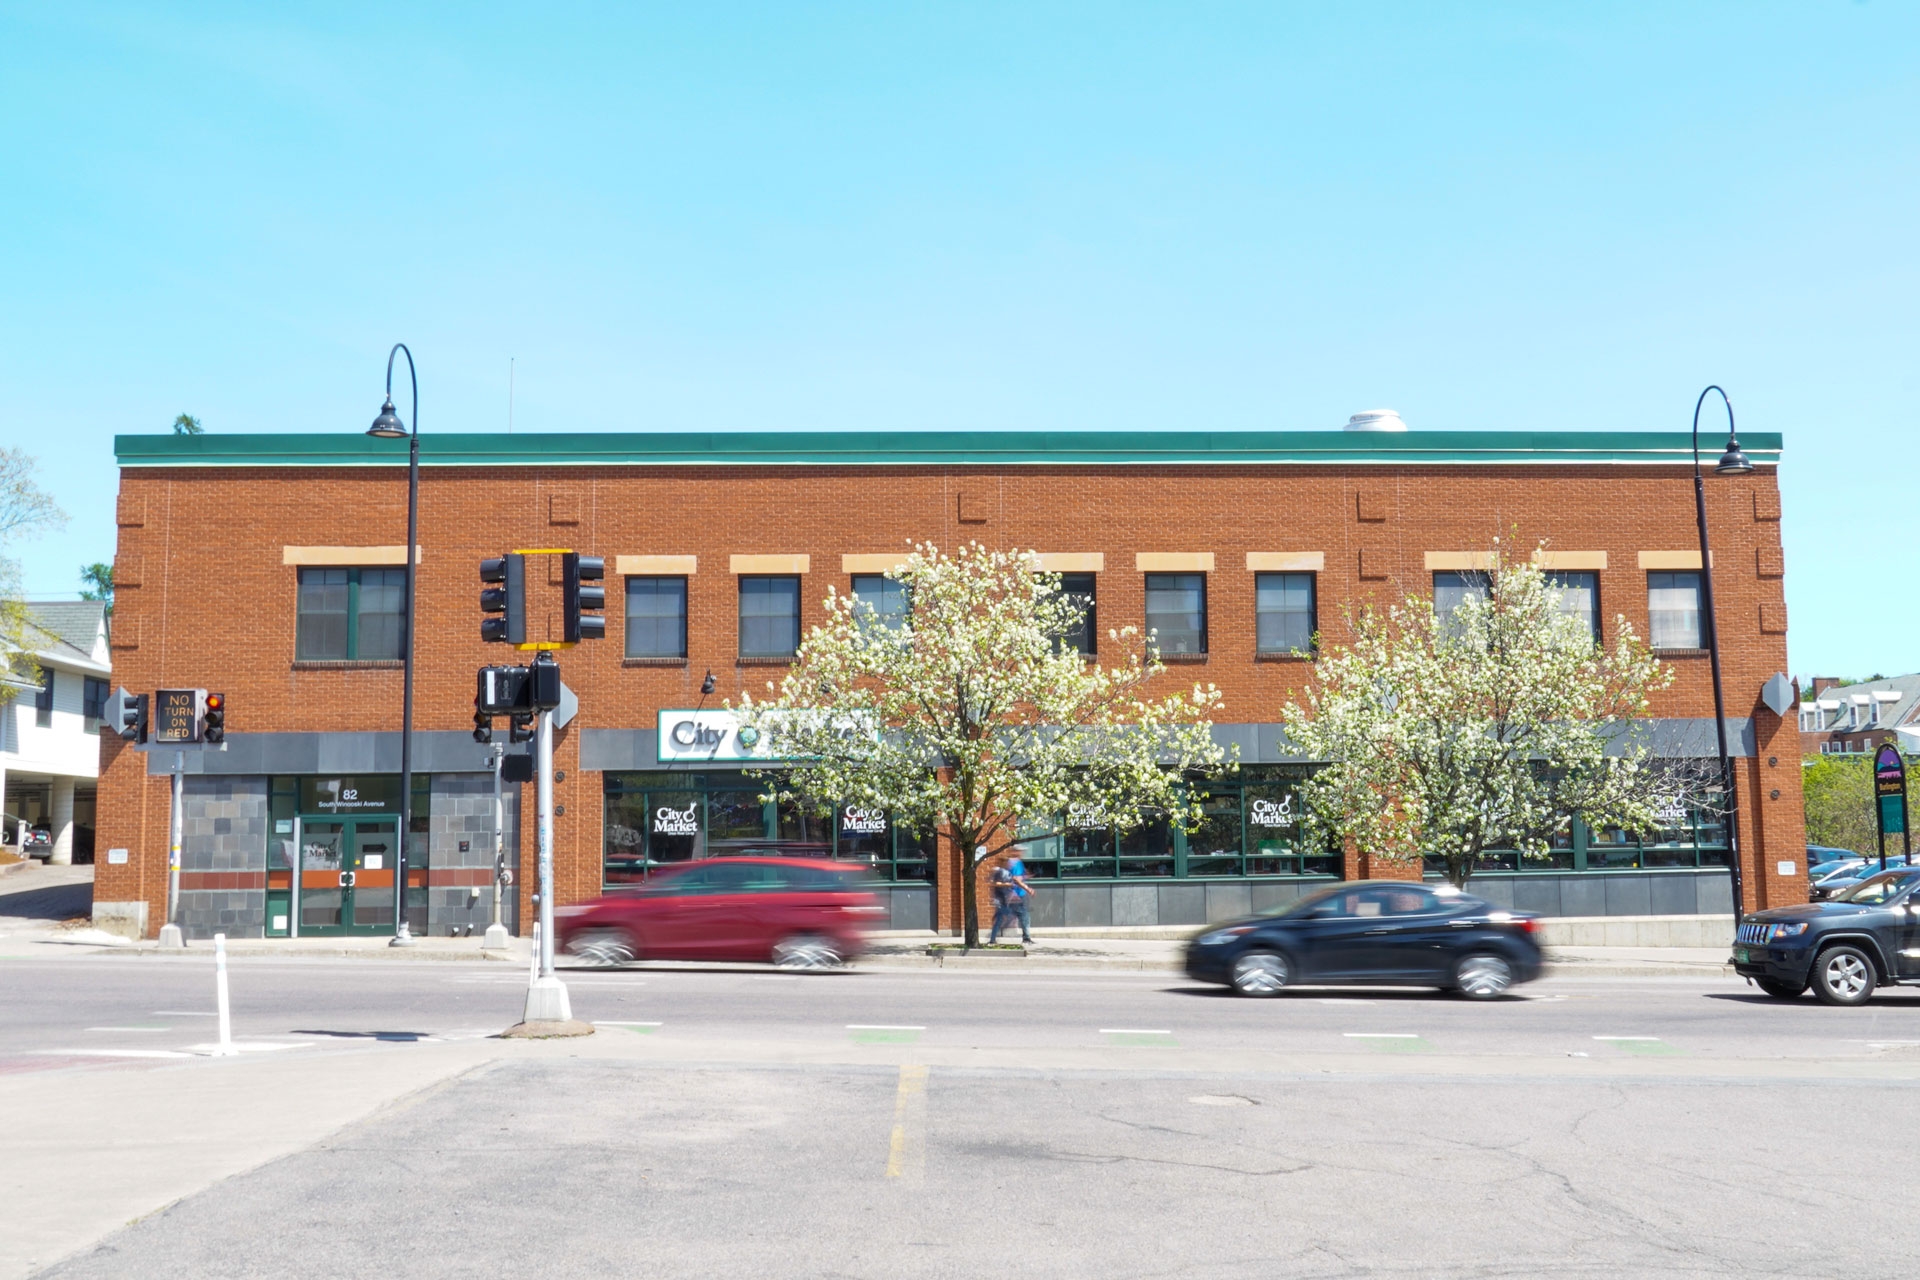 City Market's Downtown store viewed from street level, across South Winooski avenue. The building is rust red brick with green siding along the side of the roof. In front of the building, two trees are covered in white blossoms. A red hatchback and black sedan are on the street in front of the building. They are blurry due to movement.